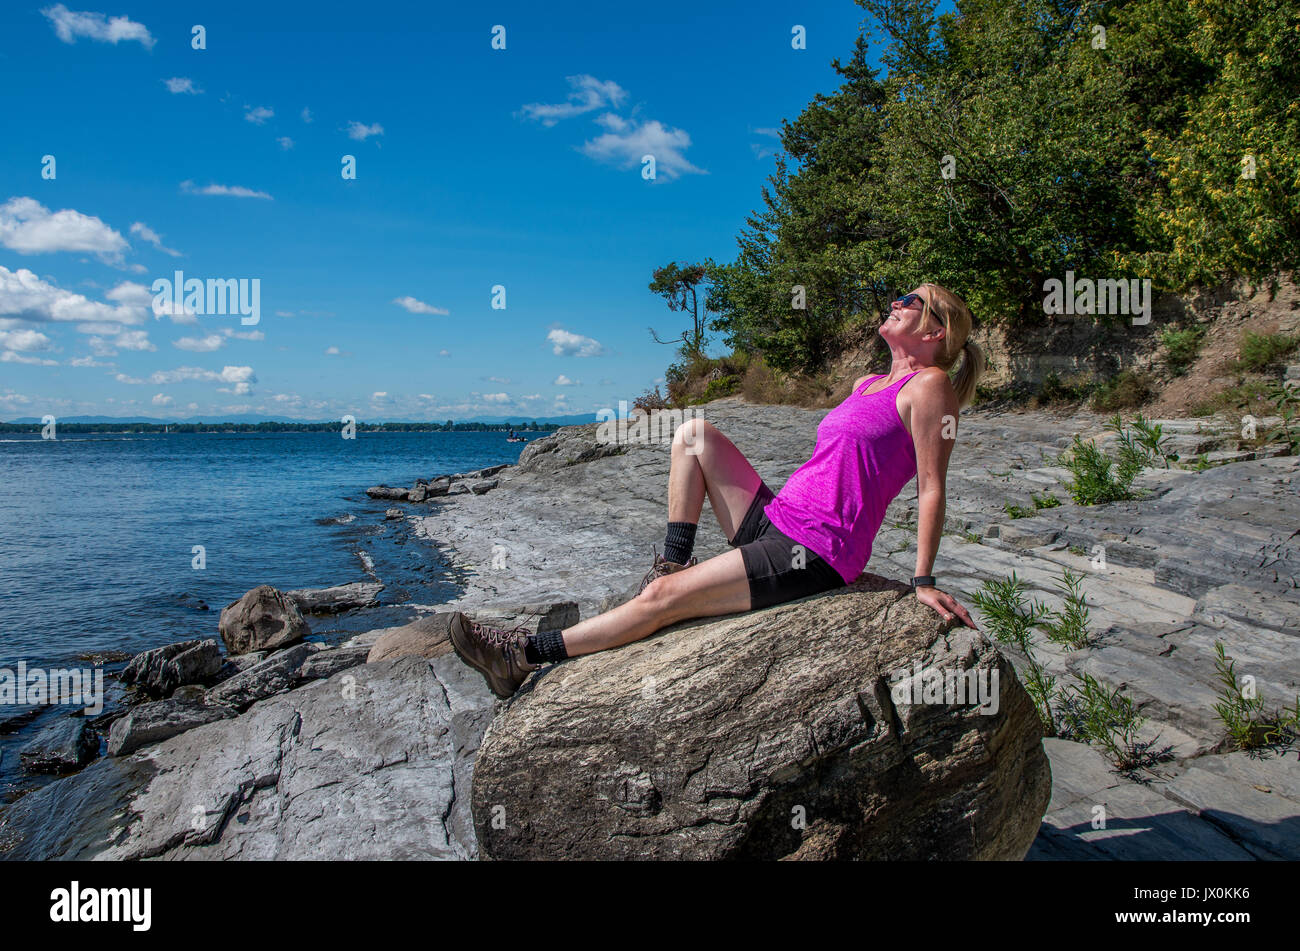 on a rocky shore of lake Champlain walking and looking out onto the lake Stock Photo